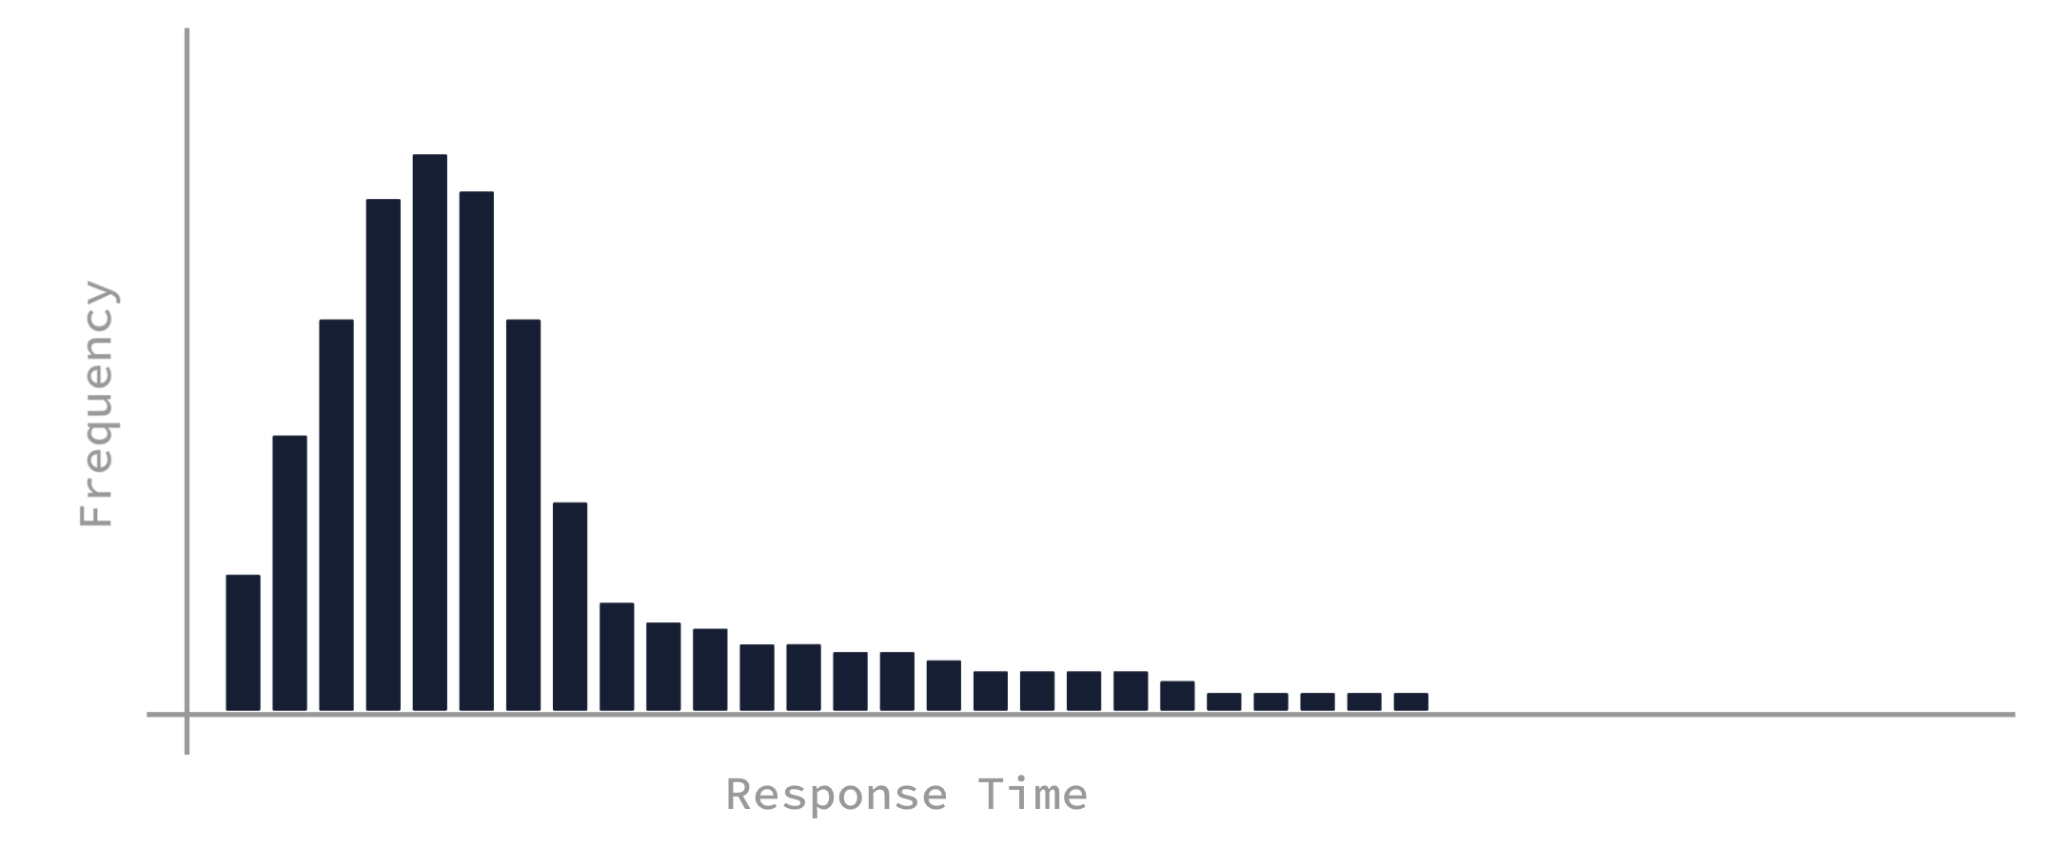 A graph similar to the previous graphs of the response time of an API, except now the curve has been replaced by a series of black line graph boxes representing the buckets of a histogram.